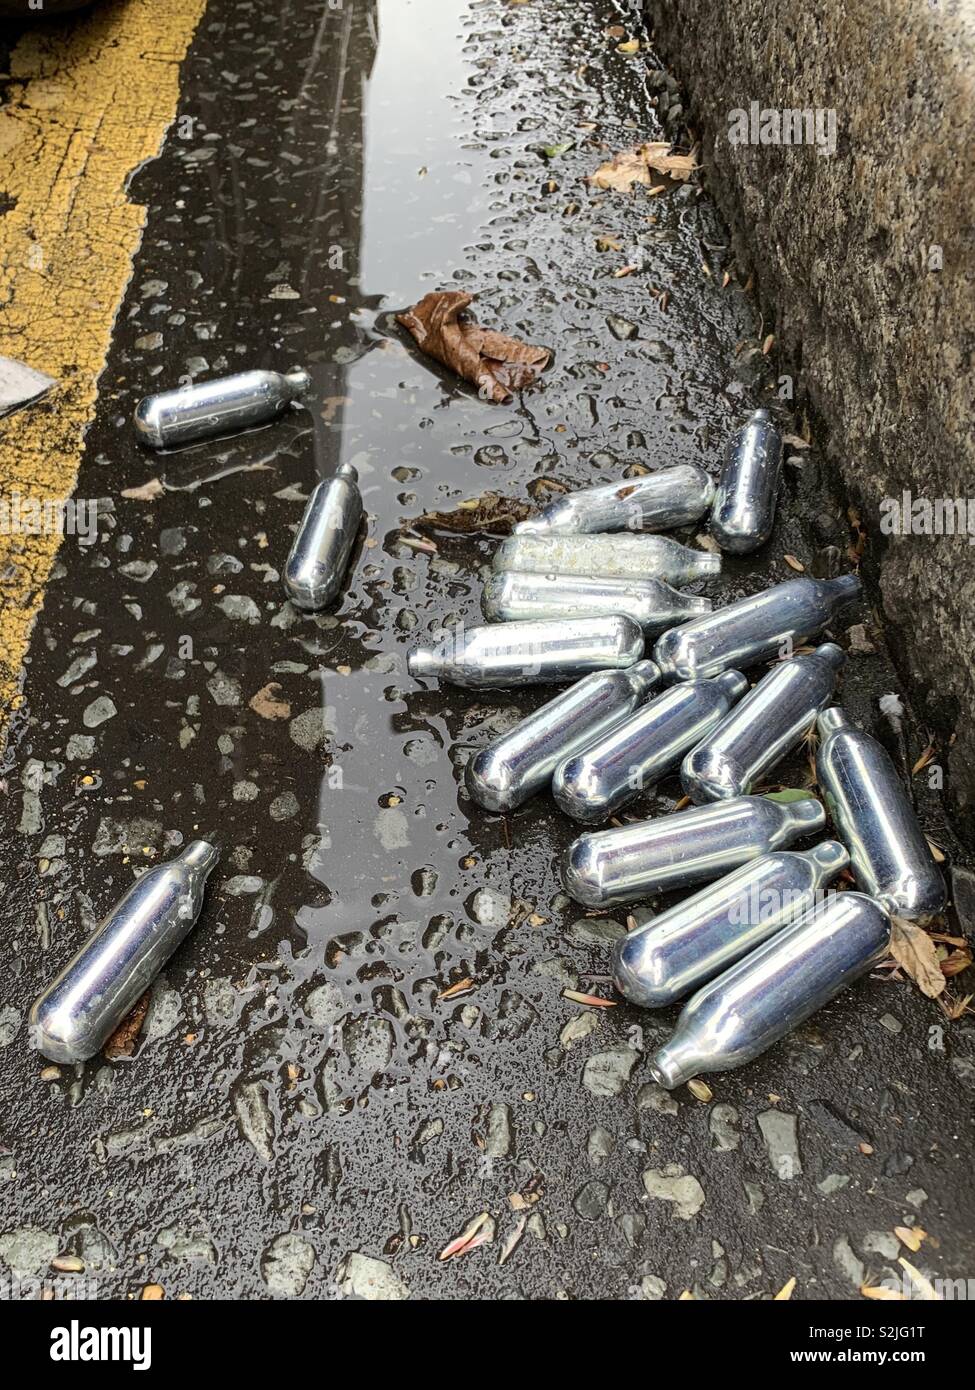 Lachgas cannisters Stockfoto